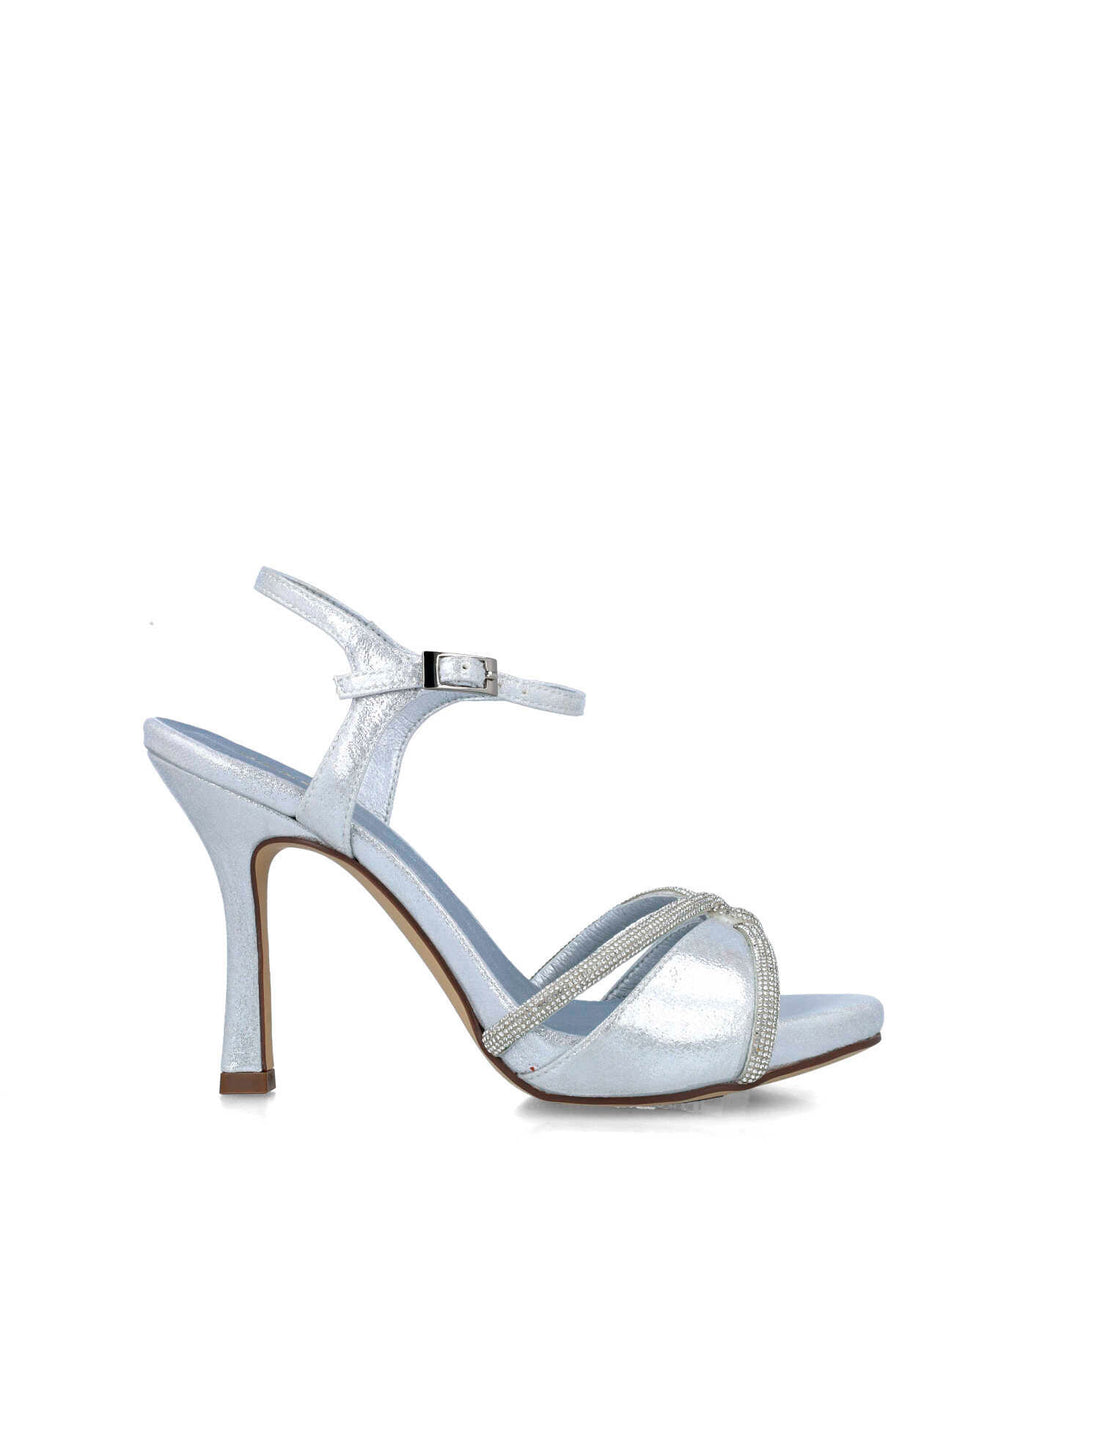 Silver High-Heel Sandals With Embellishments_24778_09_01